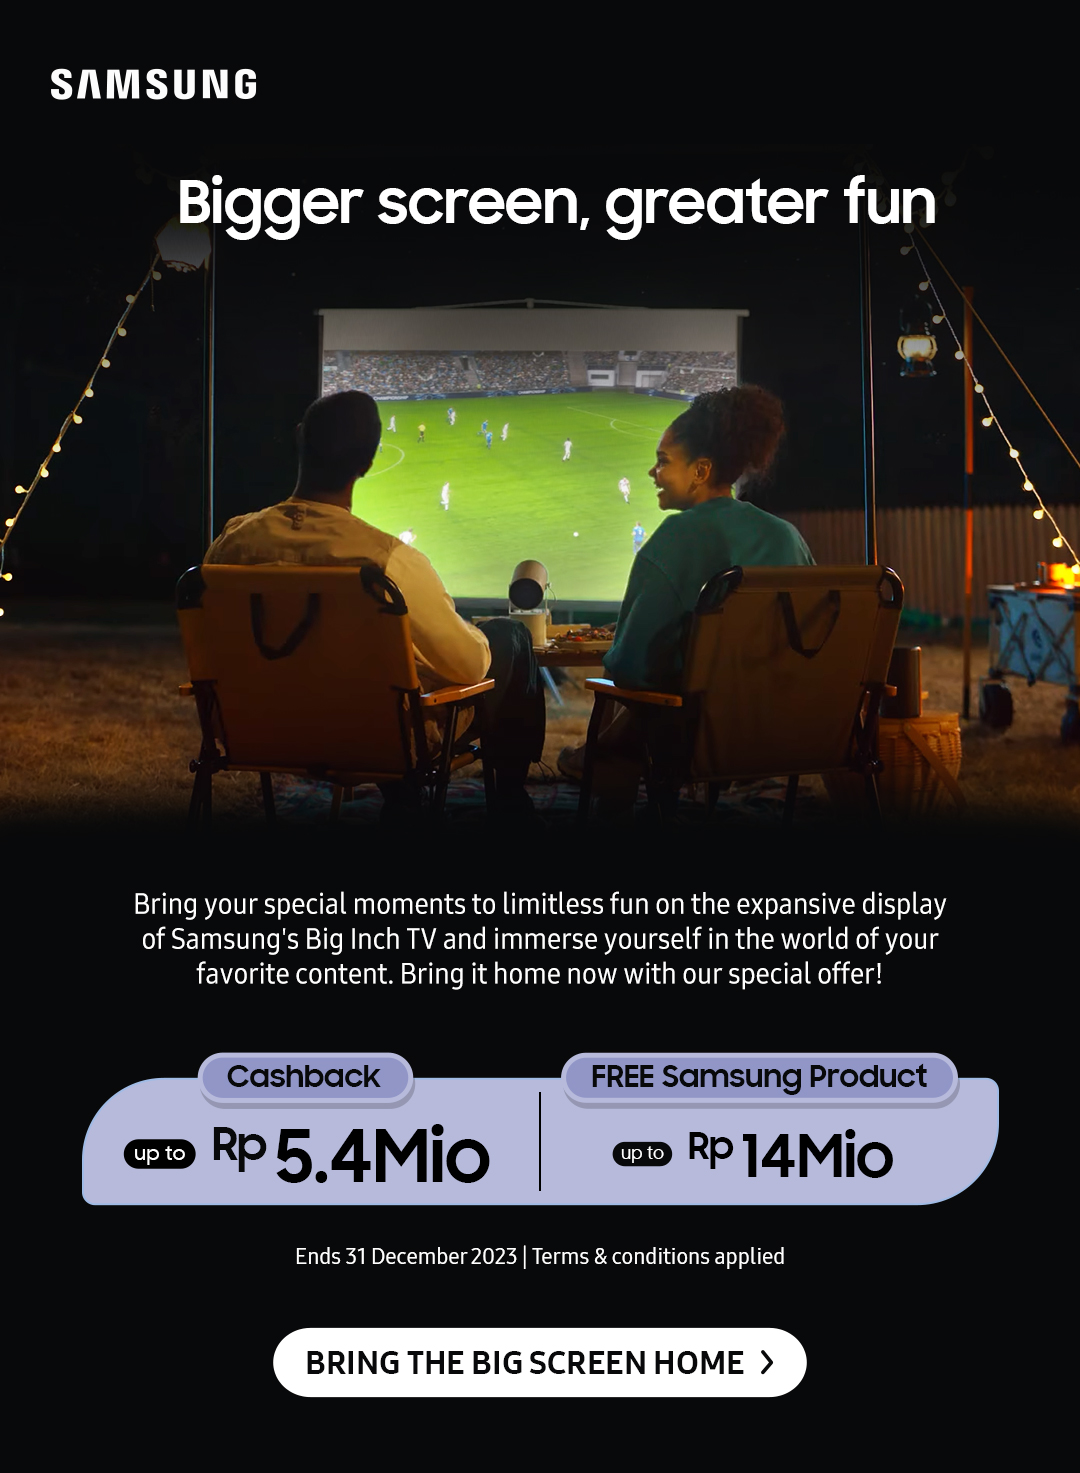 Bigger Screen, greater fun | Bring your special moments to limitless fun on the expansive display of Samsung's Big Inch TV and immerse yourself in the world of your favorite content. Bring it home now with our special offer!